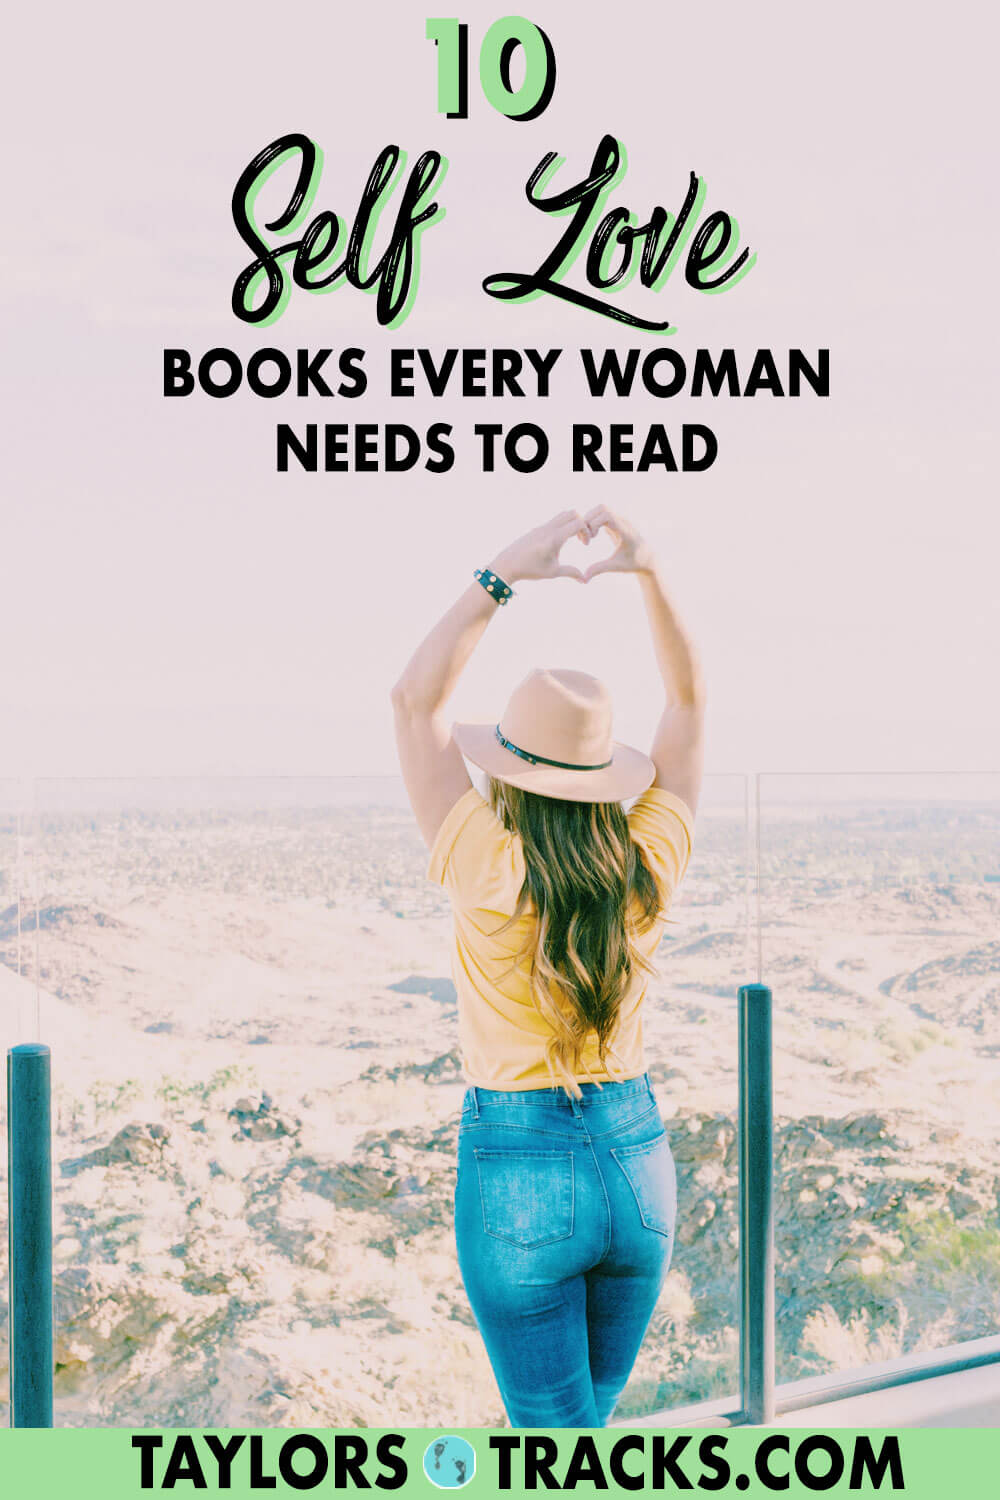 These self love books for women are the perfect pick me ups that will help you develop your self love, confidence, self esteem and more. Click to find which self love book will be your next read!